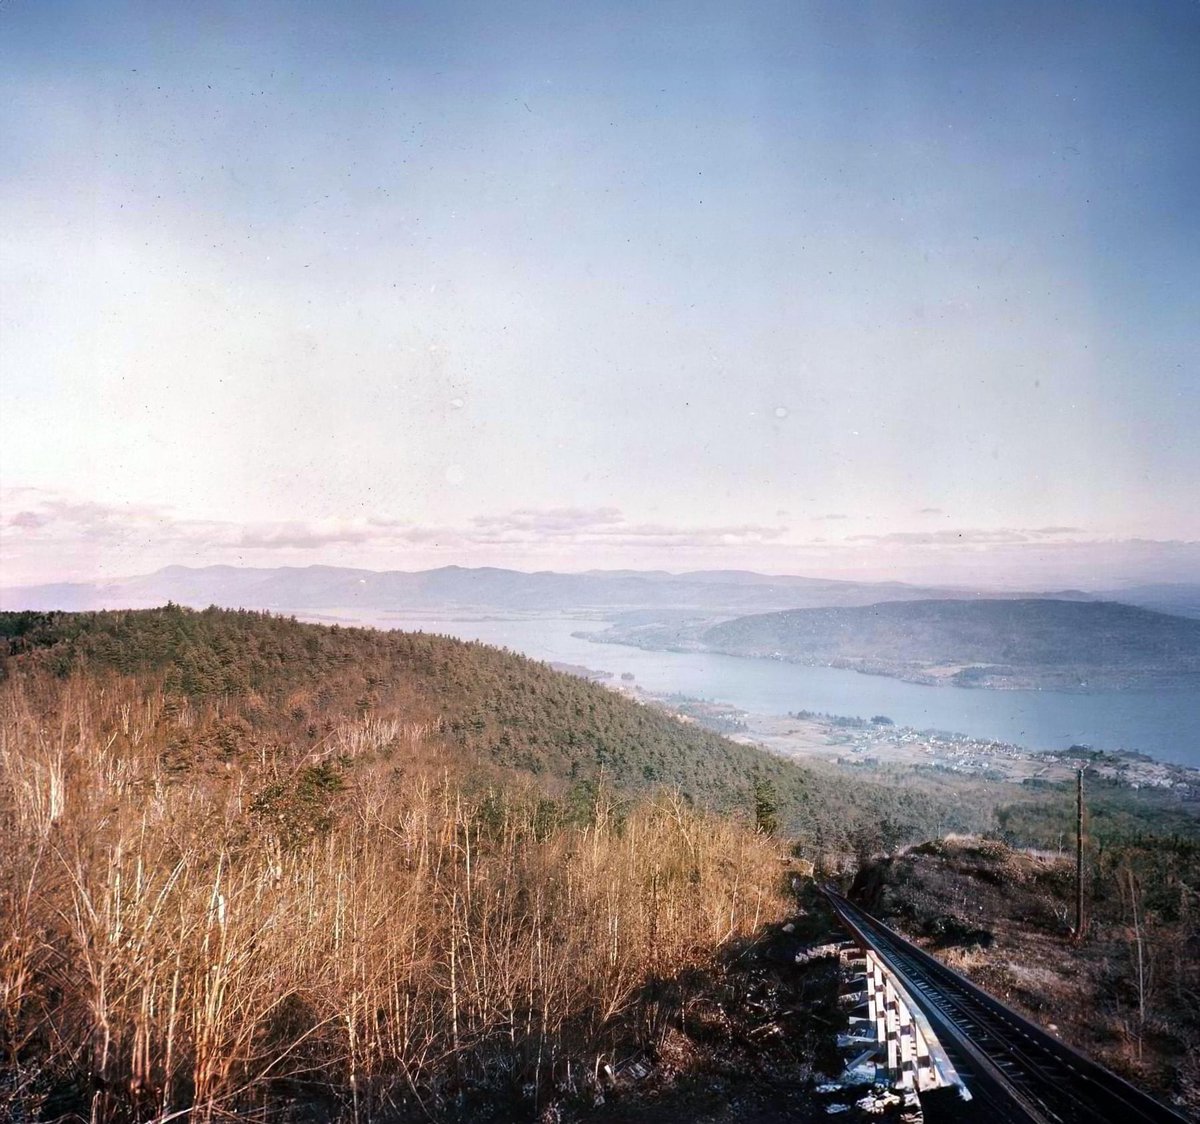 #LakeGeorge // 1910
Restored and colorized. The detail in this image is incredible for being 113 years old.

View north from Prospect Mountain overlooking the cable railroad track that once served the Prospect Mountain Hotel. From this vantage point, one can observe the panorama